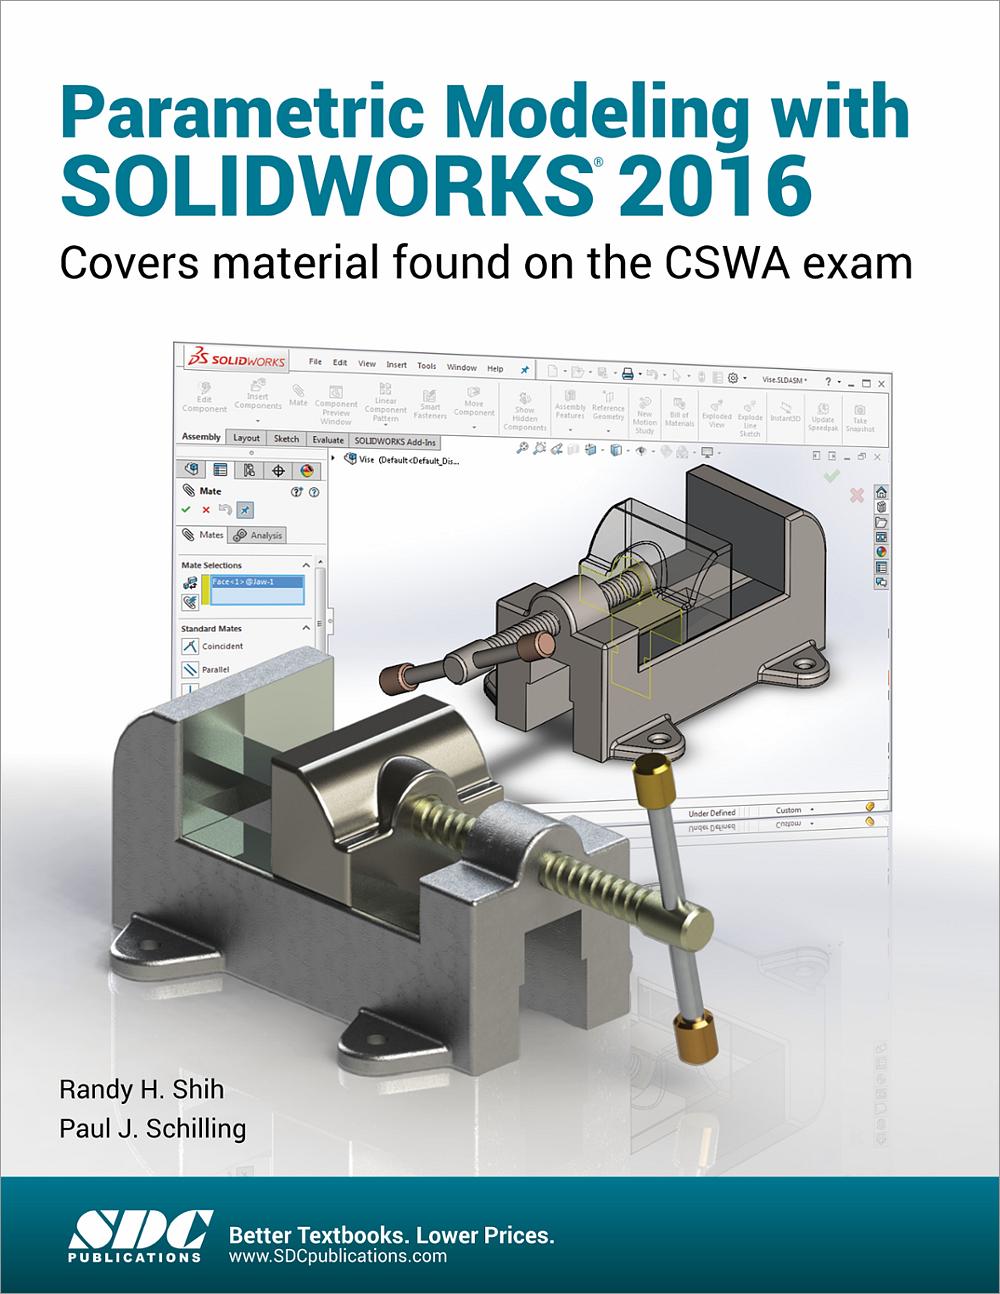 parametric modeling with solidworks 2014 pdf download